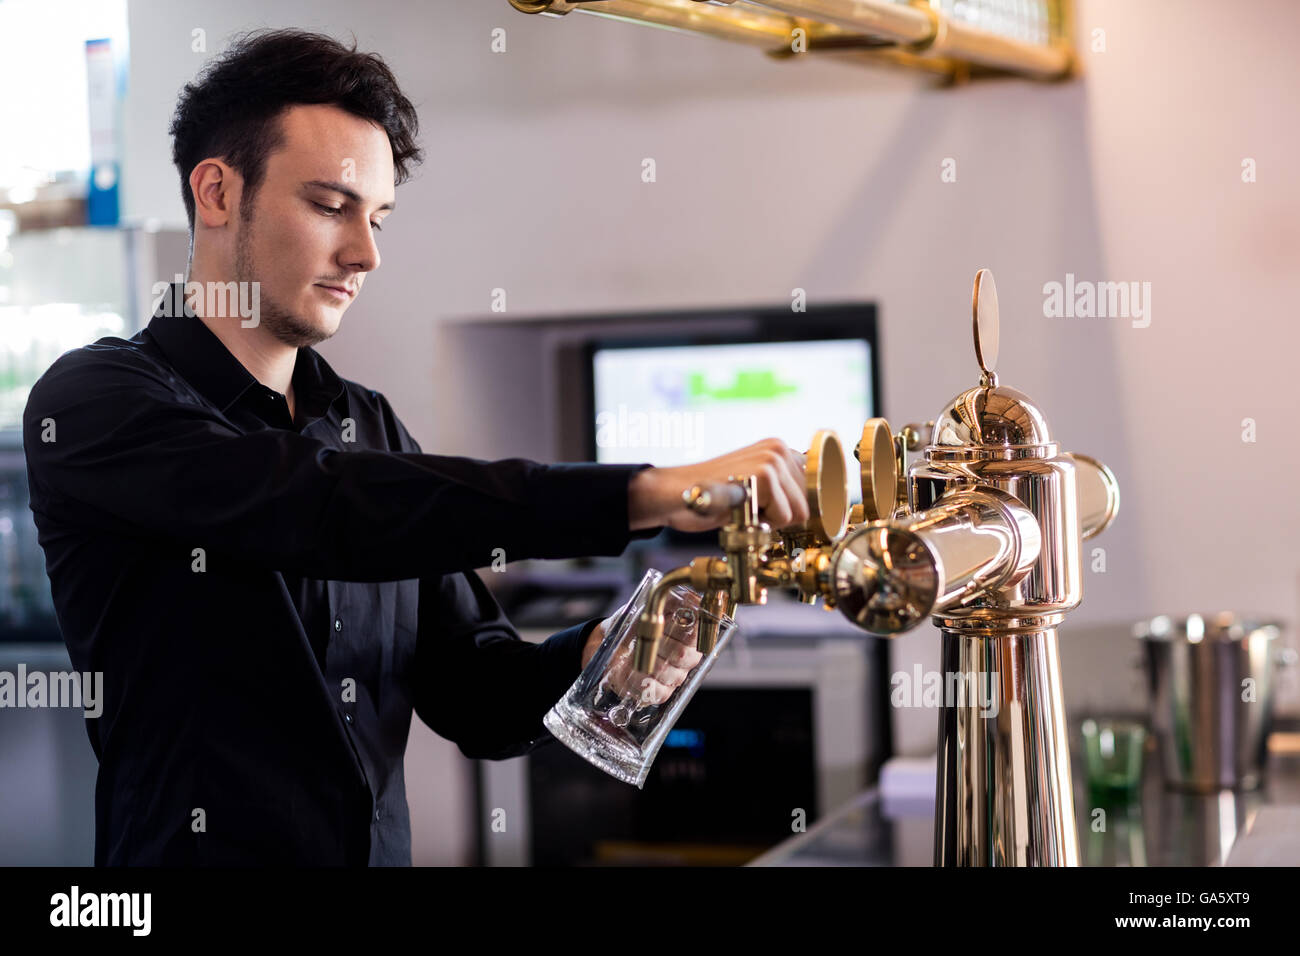 Barkeeper pouring beer in glass at counter Stock Photo